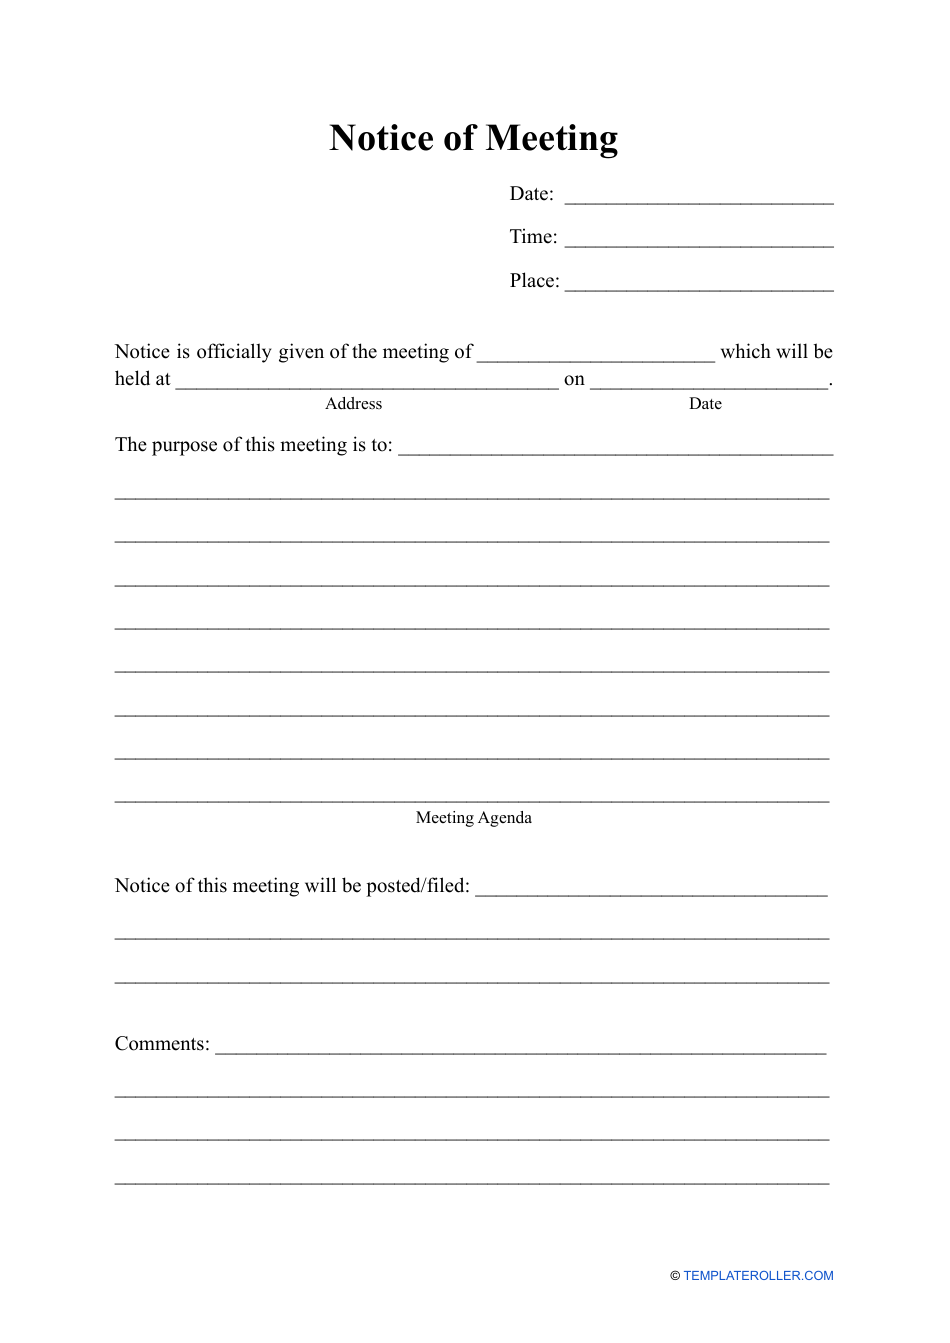 Notice of Meeting Template, Page 1